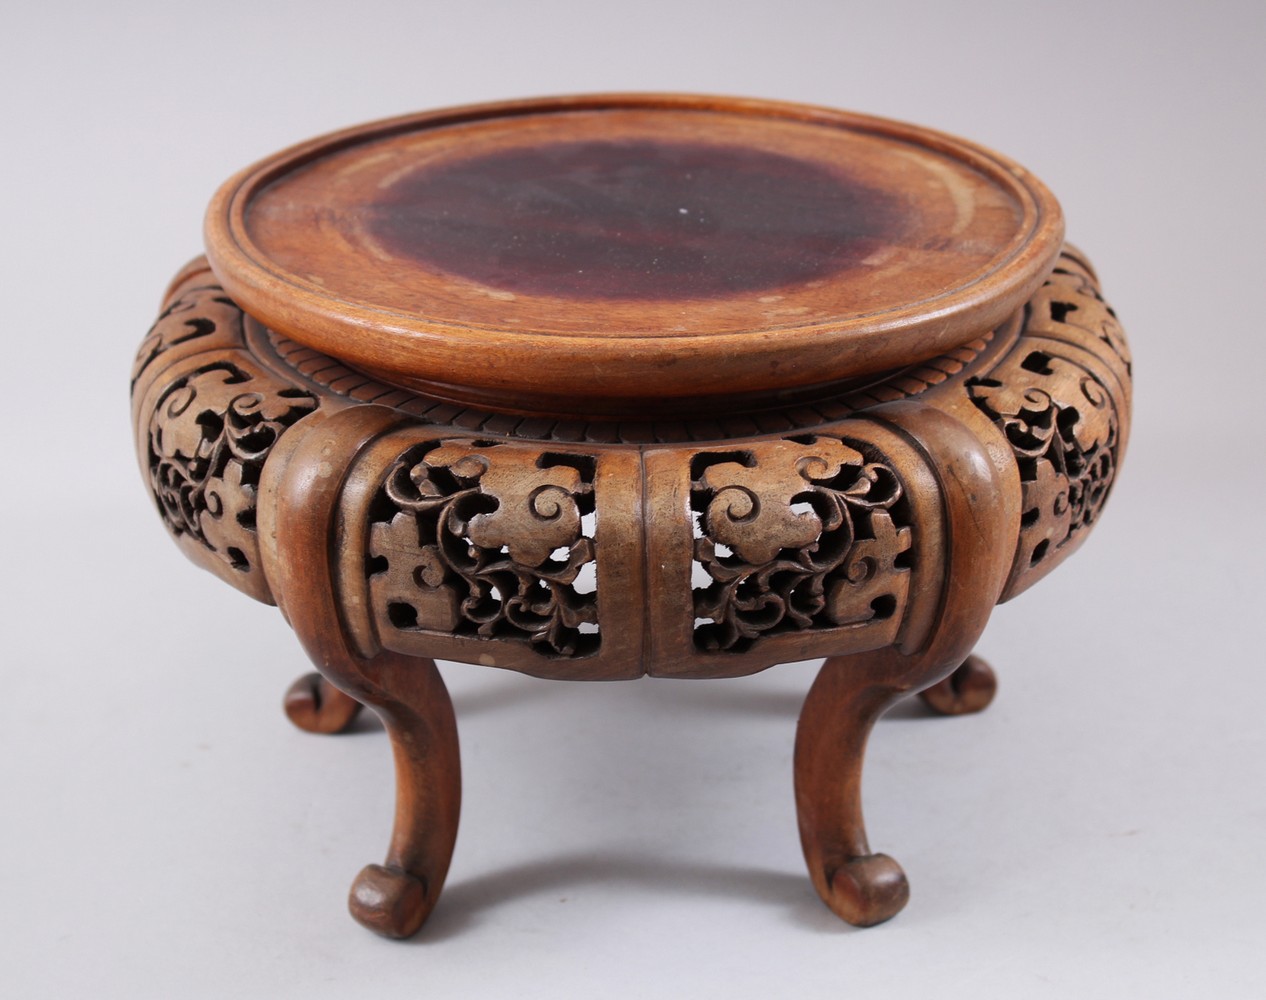 A GOOD 19TH CENTURY CHINESE HARDWOOD STAND, carved and pierced with floral aprons, 15.5cm high x